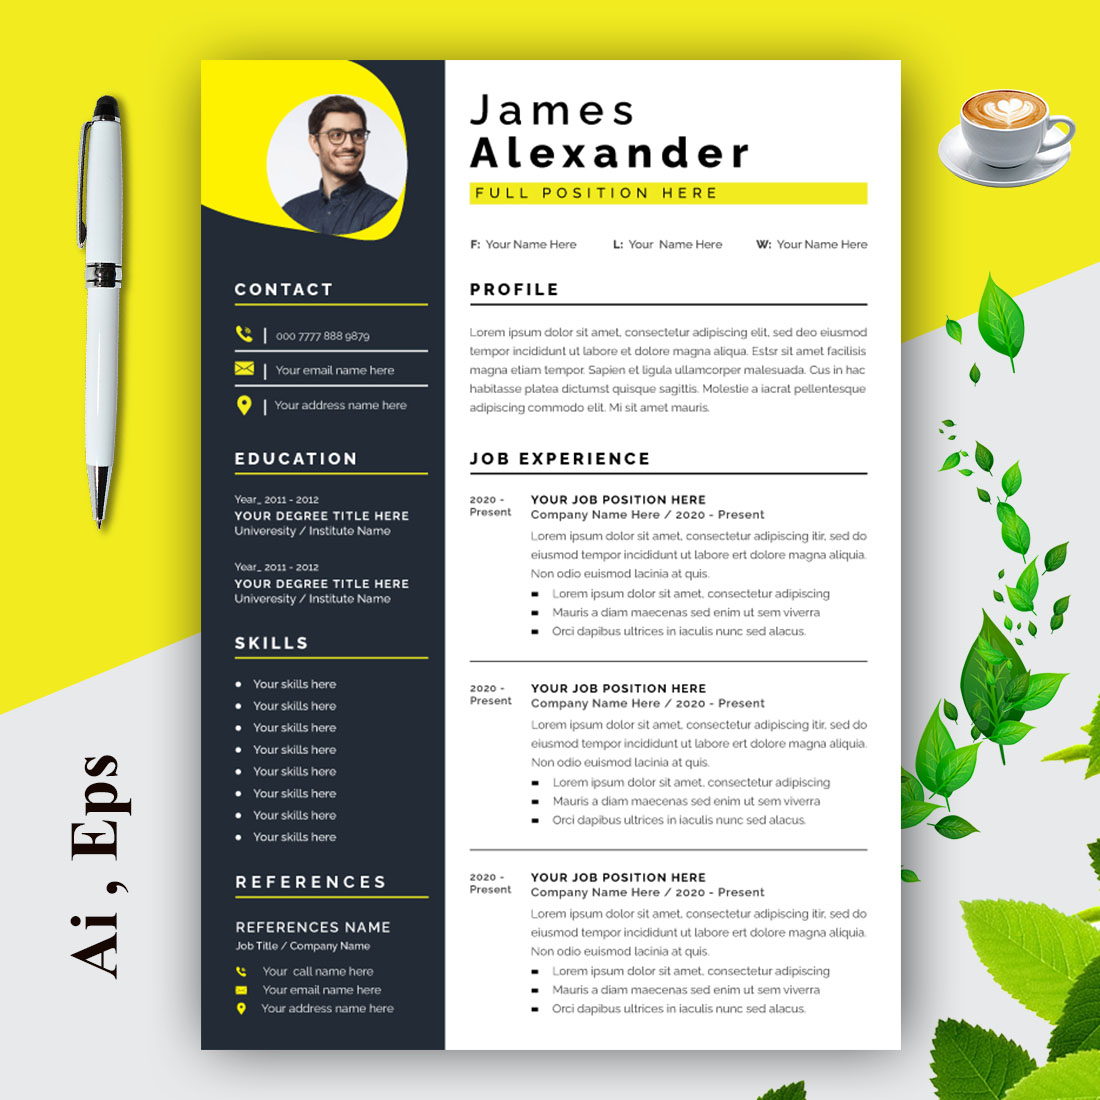 Resume Design Template with Yoello Color cover image.